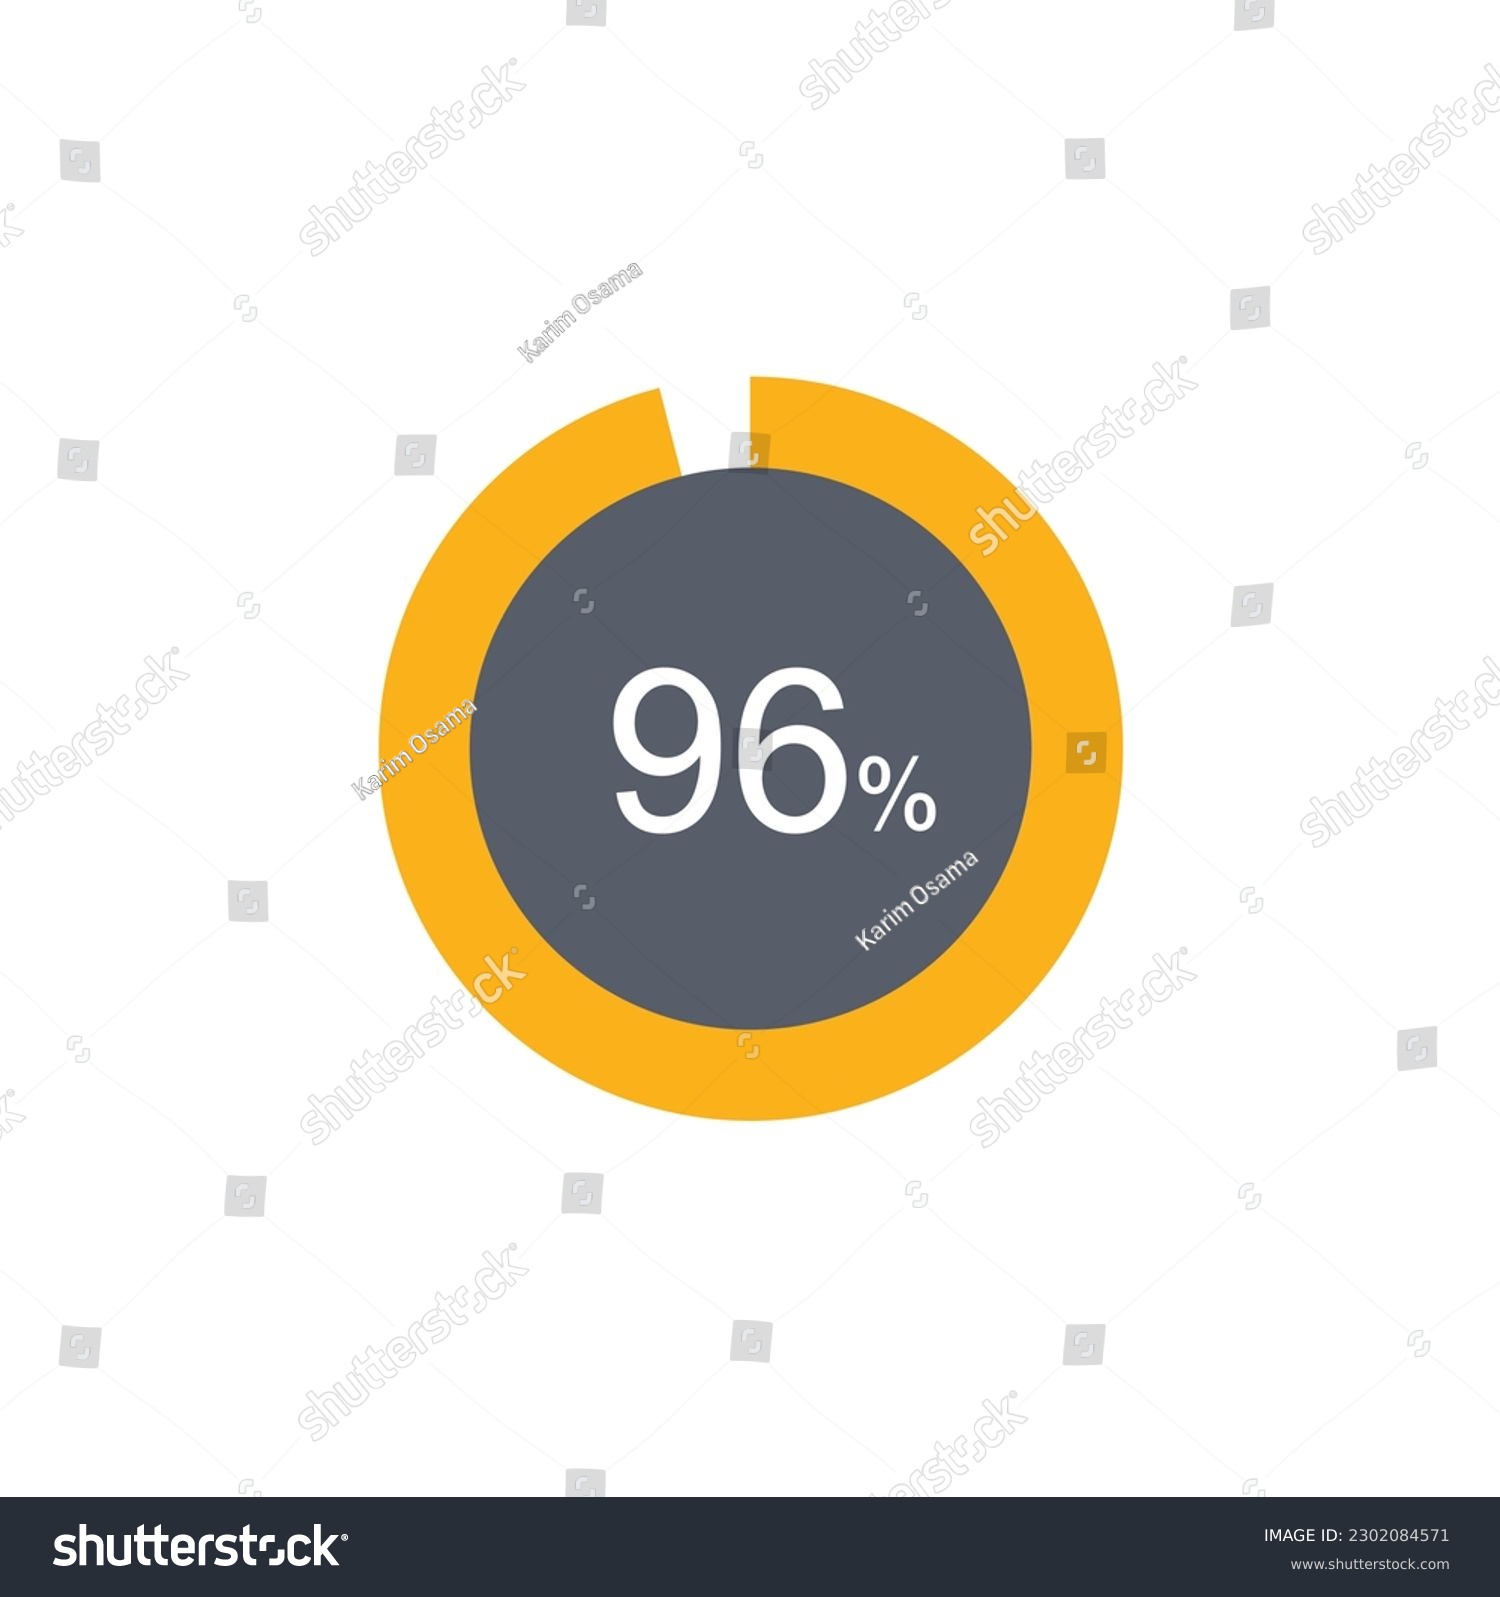 SVG of 96% percentage infographic circle icons,96 percents pie chart infographic elements for Illustration, business, web design. svg